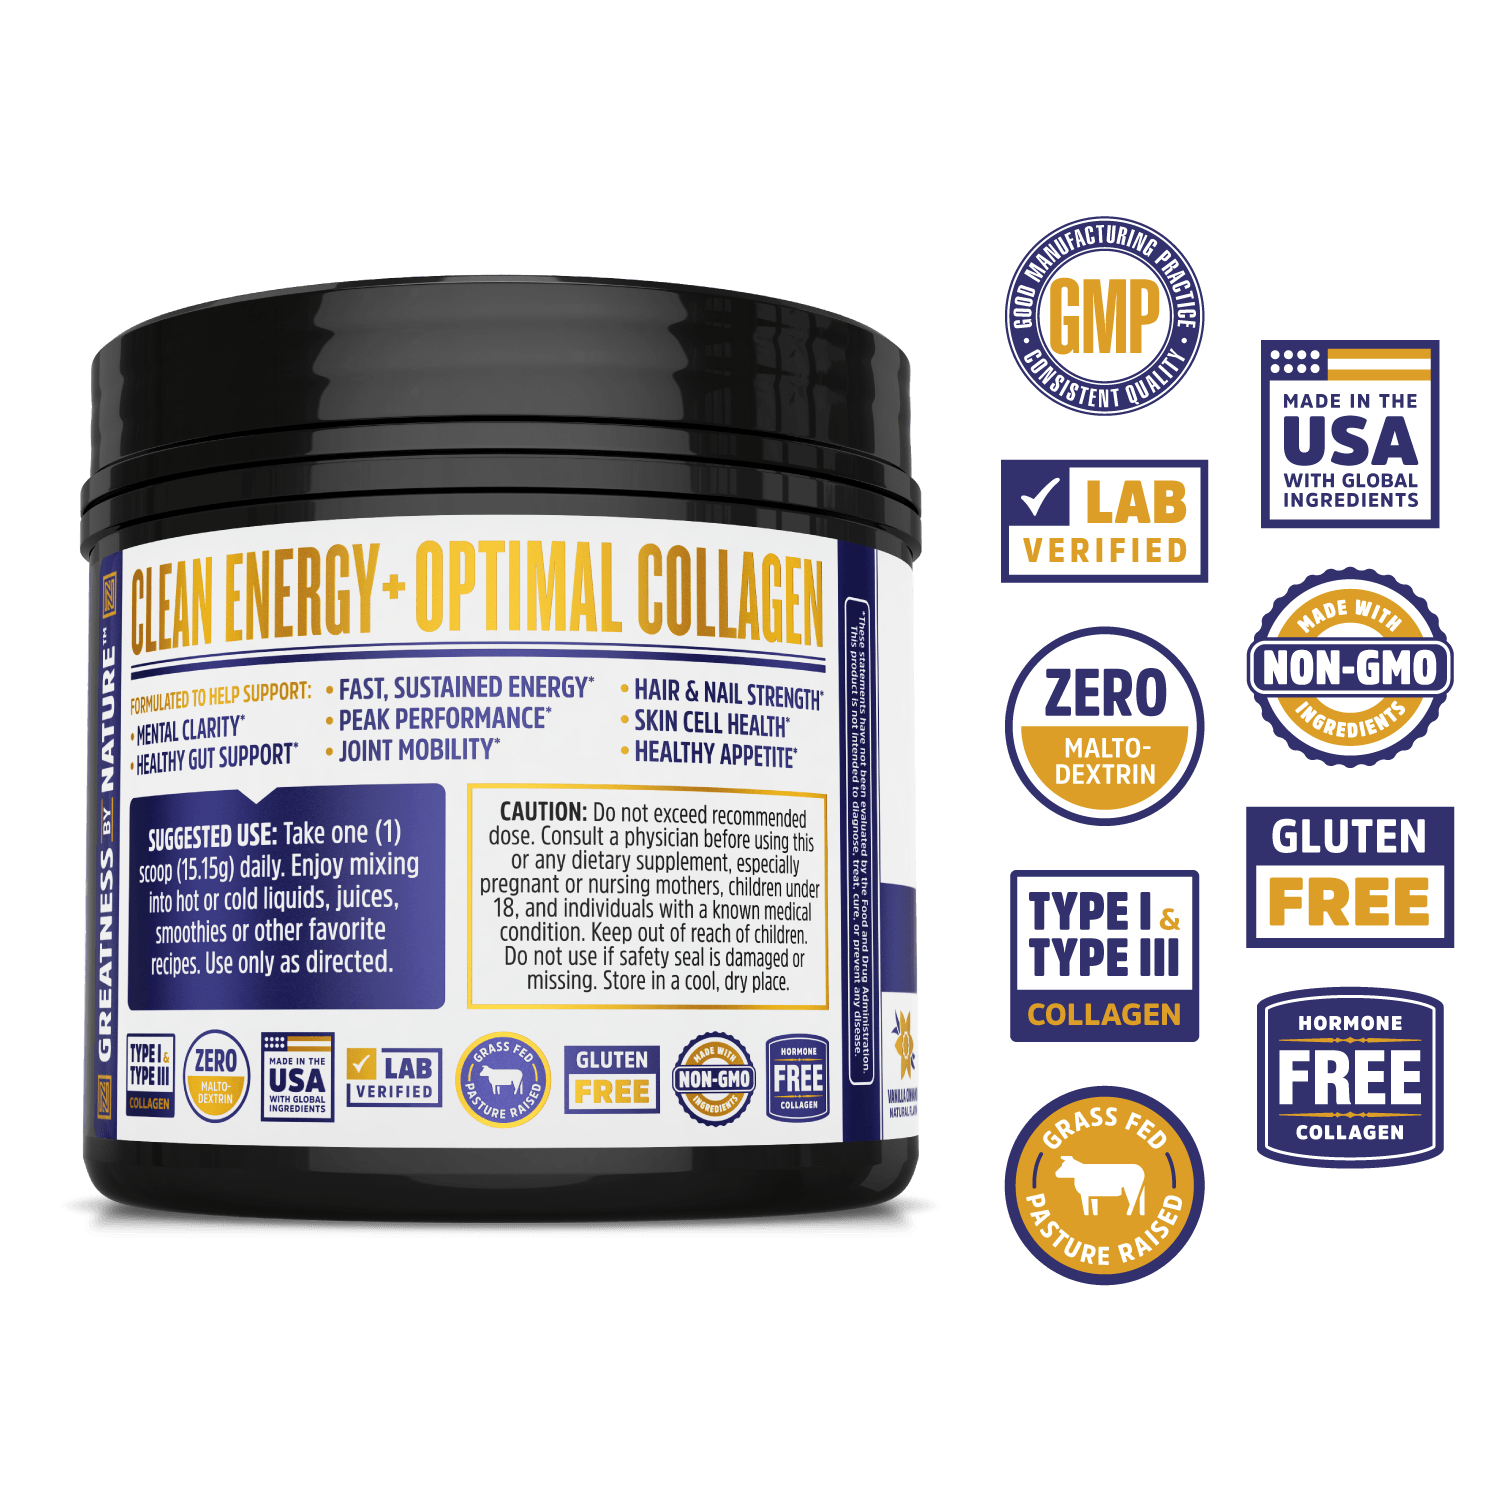 MCT & Collagen Powder from Zhou Nutrition, ketogenic energy and protein. Lab verified, good manufacturing practices, made in the USA with global ingredients, made with non-GMO ingredients, gluten free